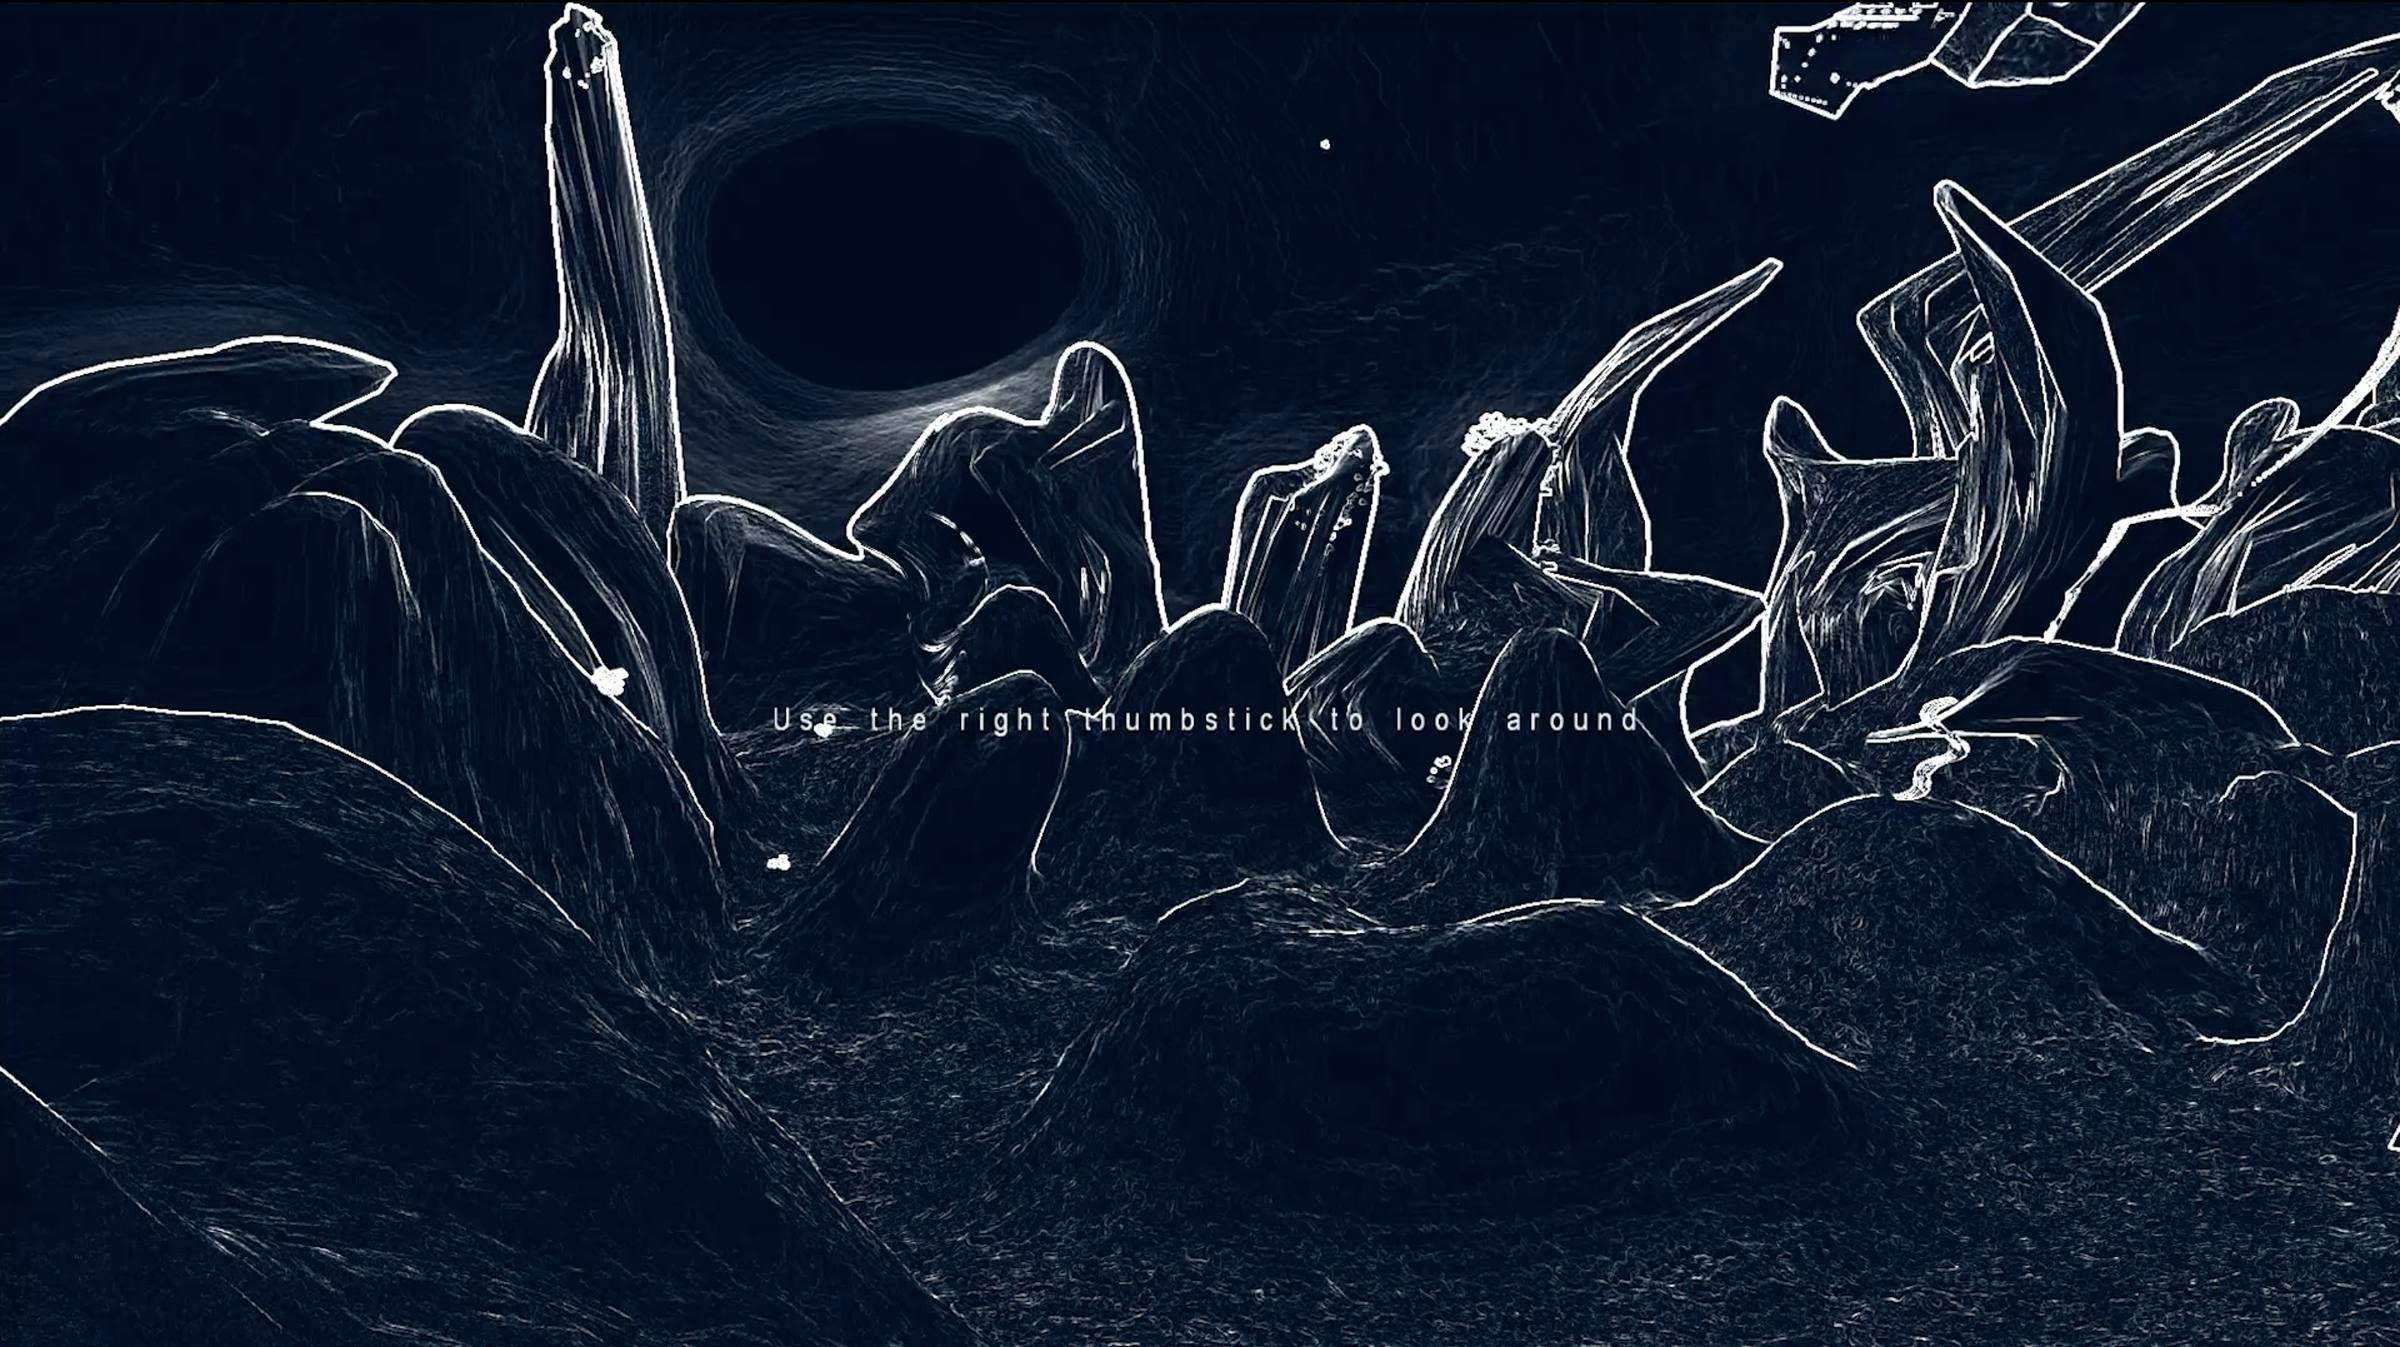 Image that looks like a drawing, white lines on a dark blue background of a surreal mountain scape. The words 'Use the right thumstick to look around' are superimposed on top.